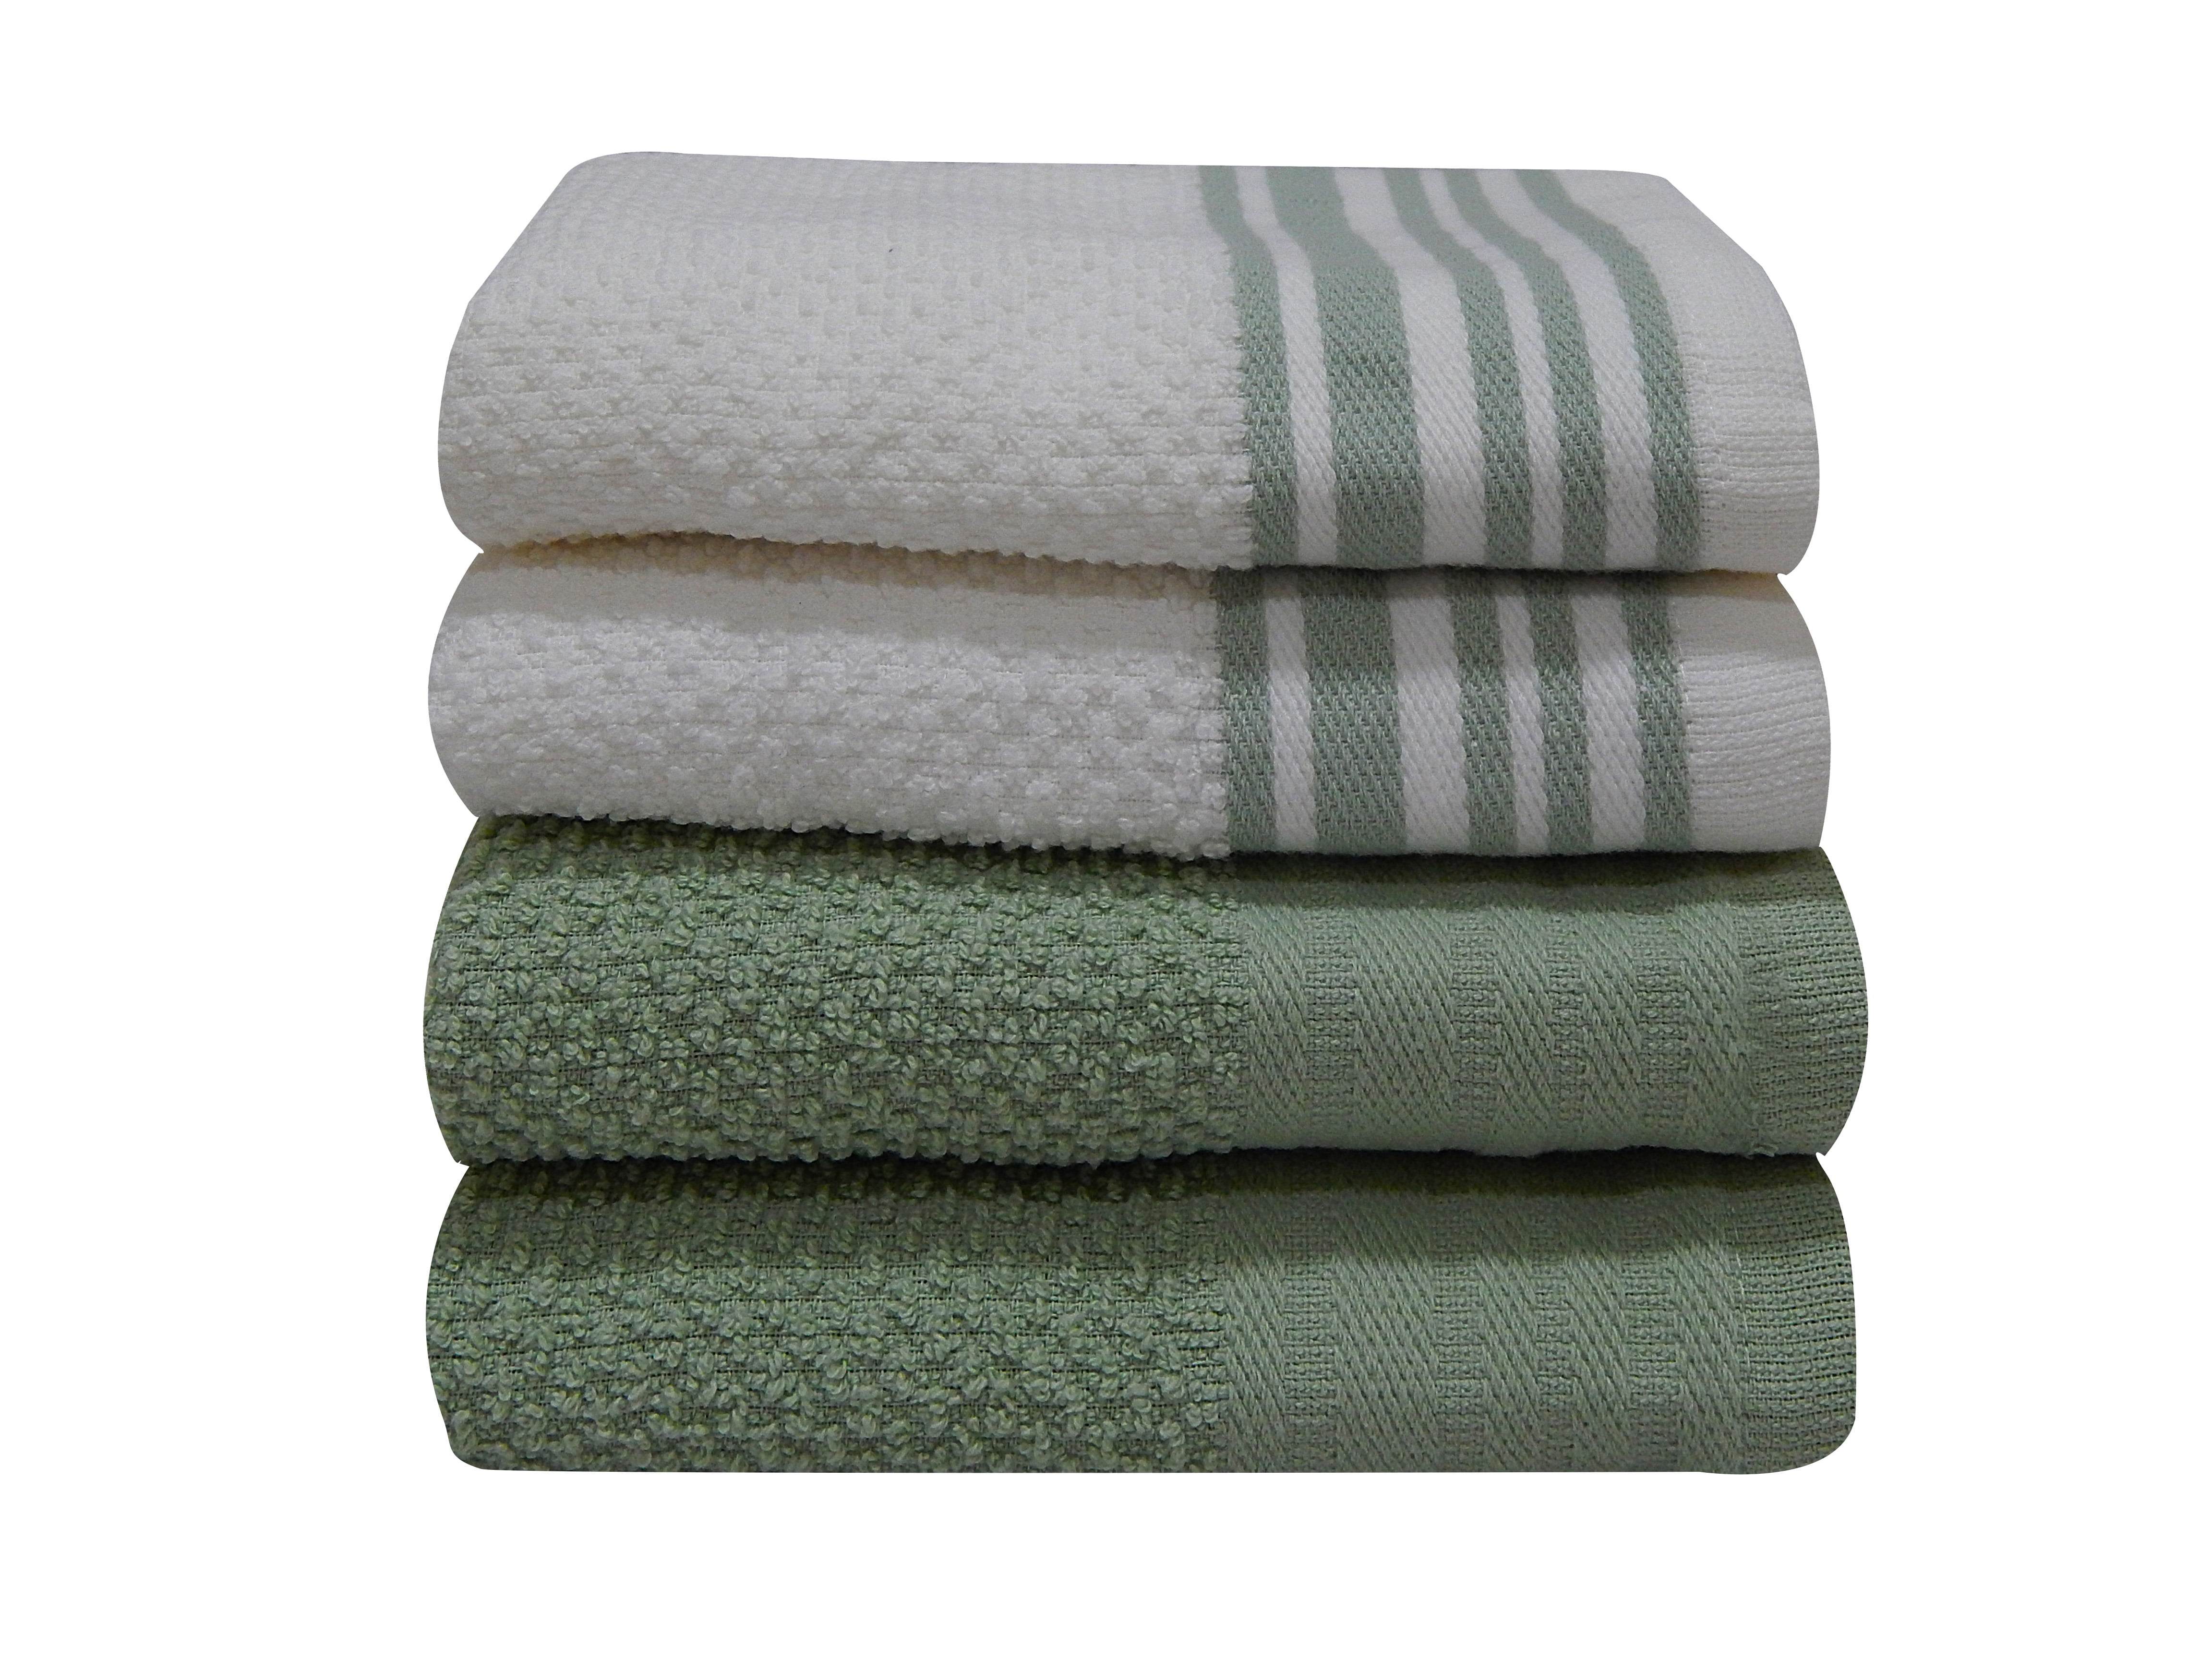 WOVEN KITCHEN TOWELS SET OF 4, Grey-White, 18''x28''. – Chardin Home